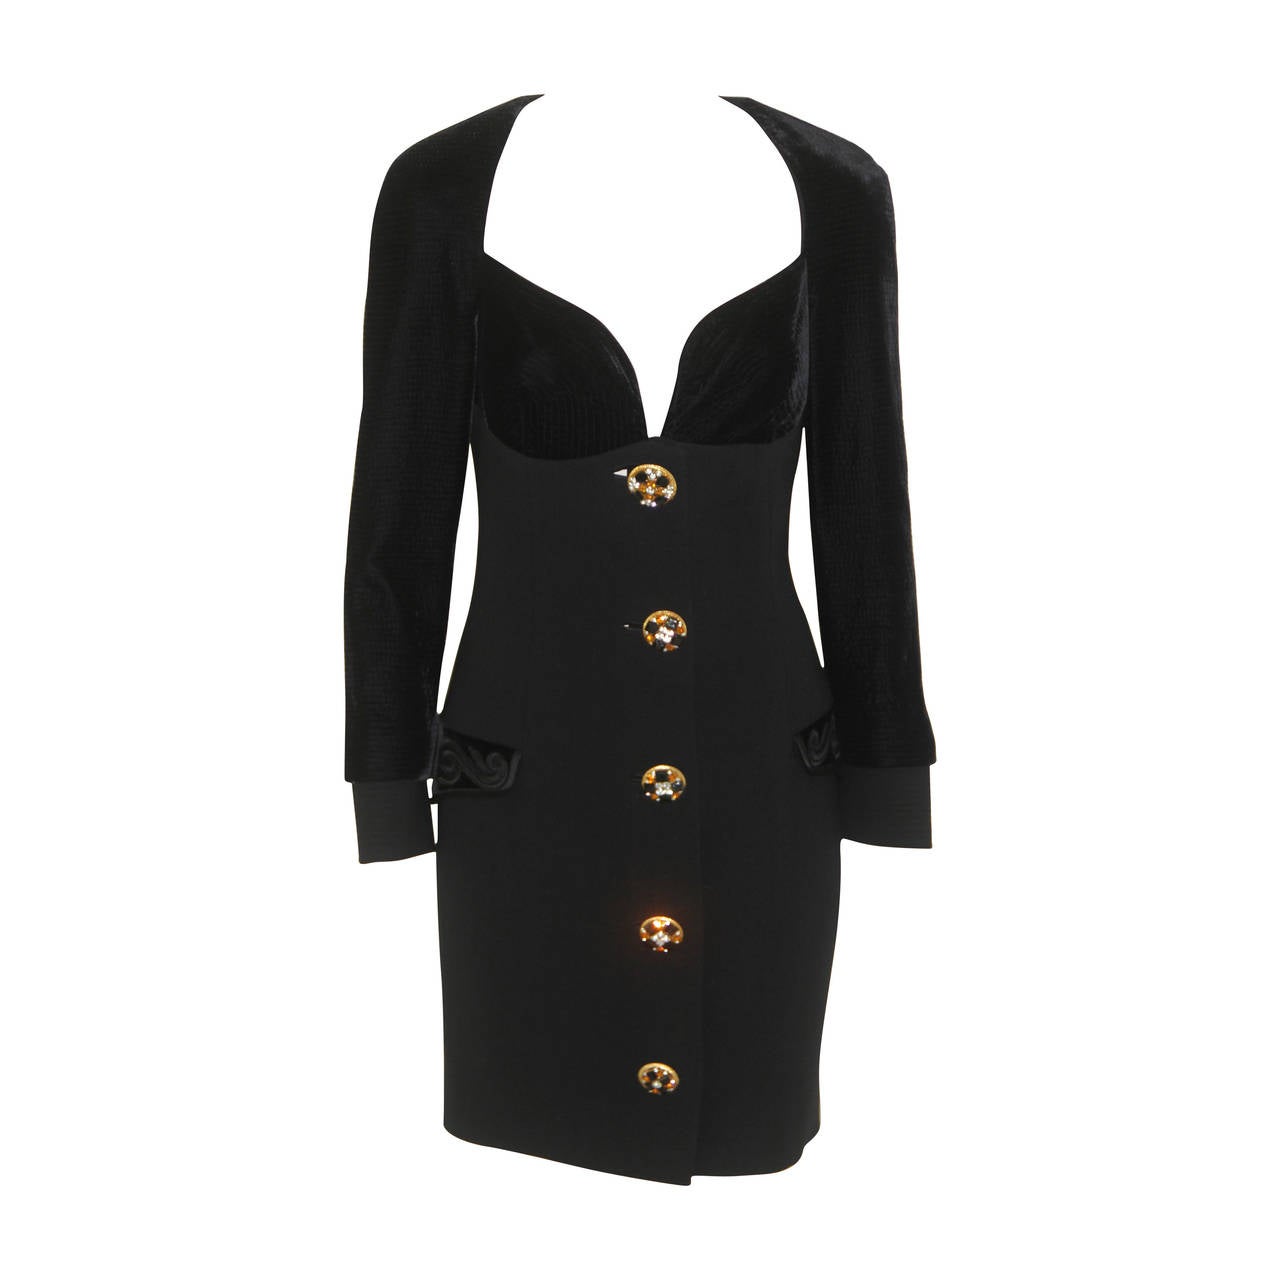 Gianni Versace Cocktail Coat Dress Fall 1991 For Sale